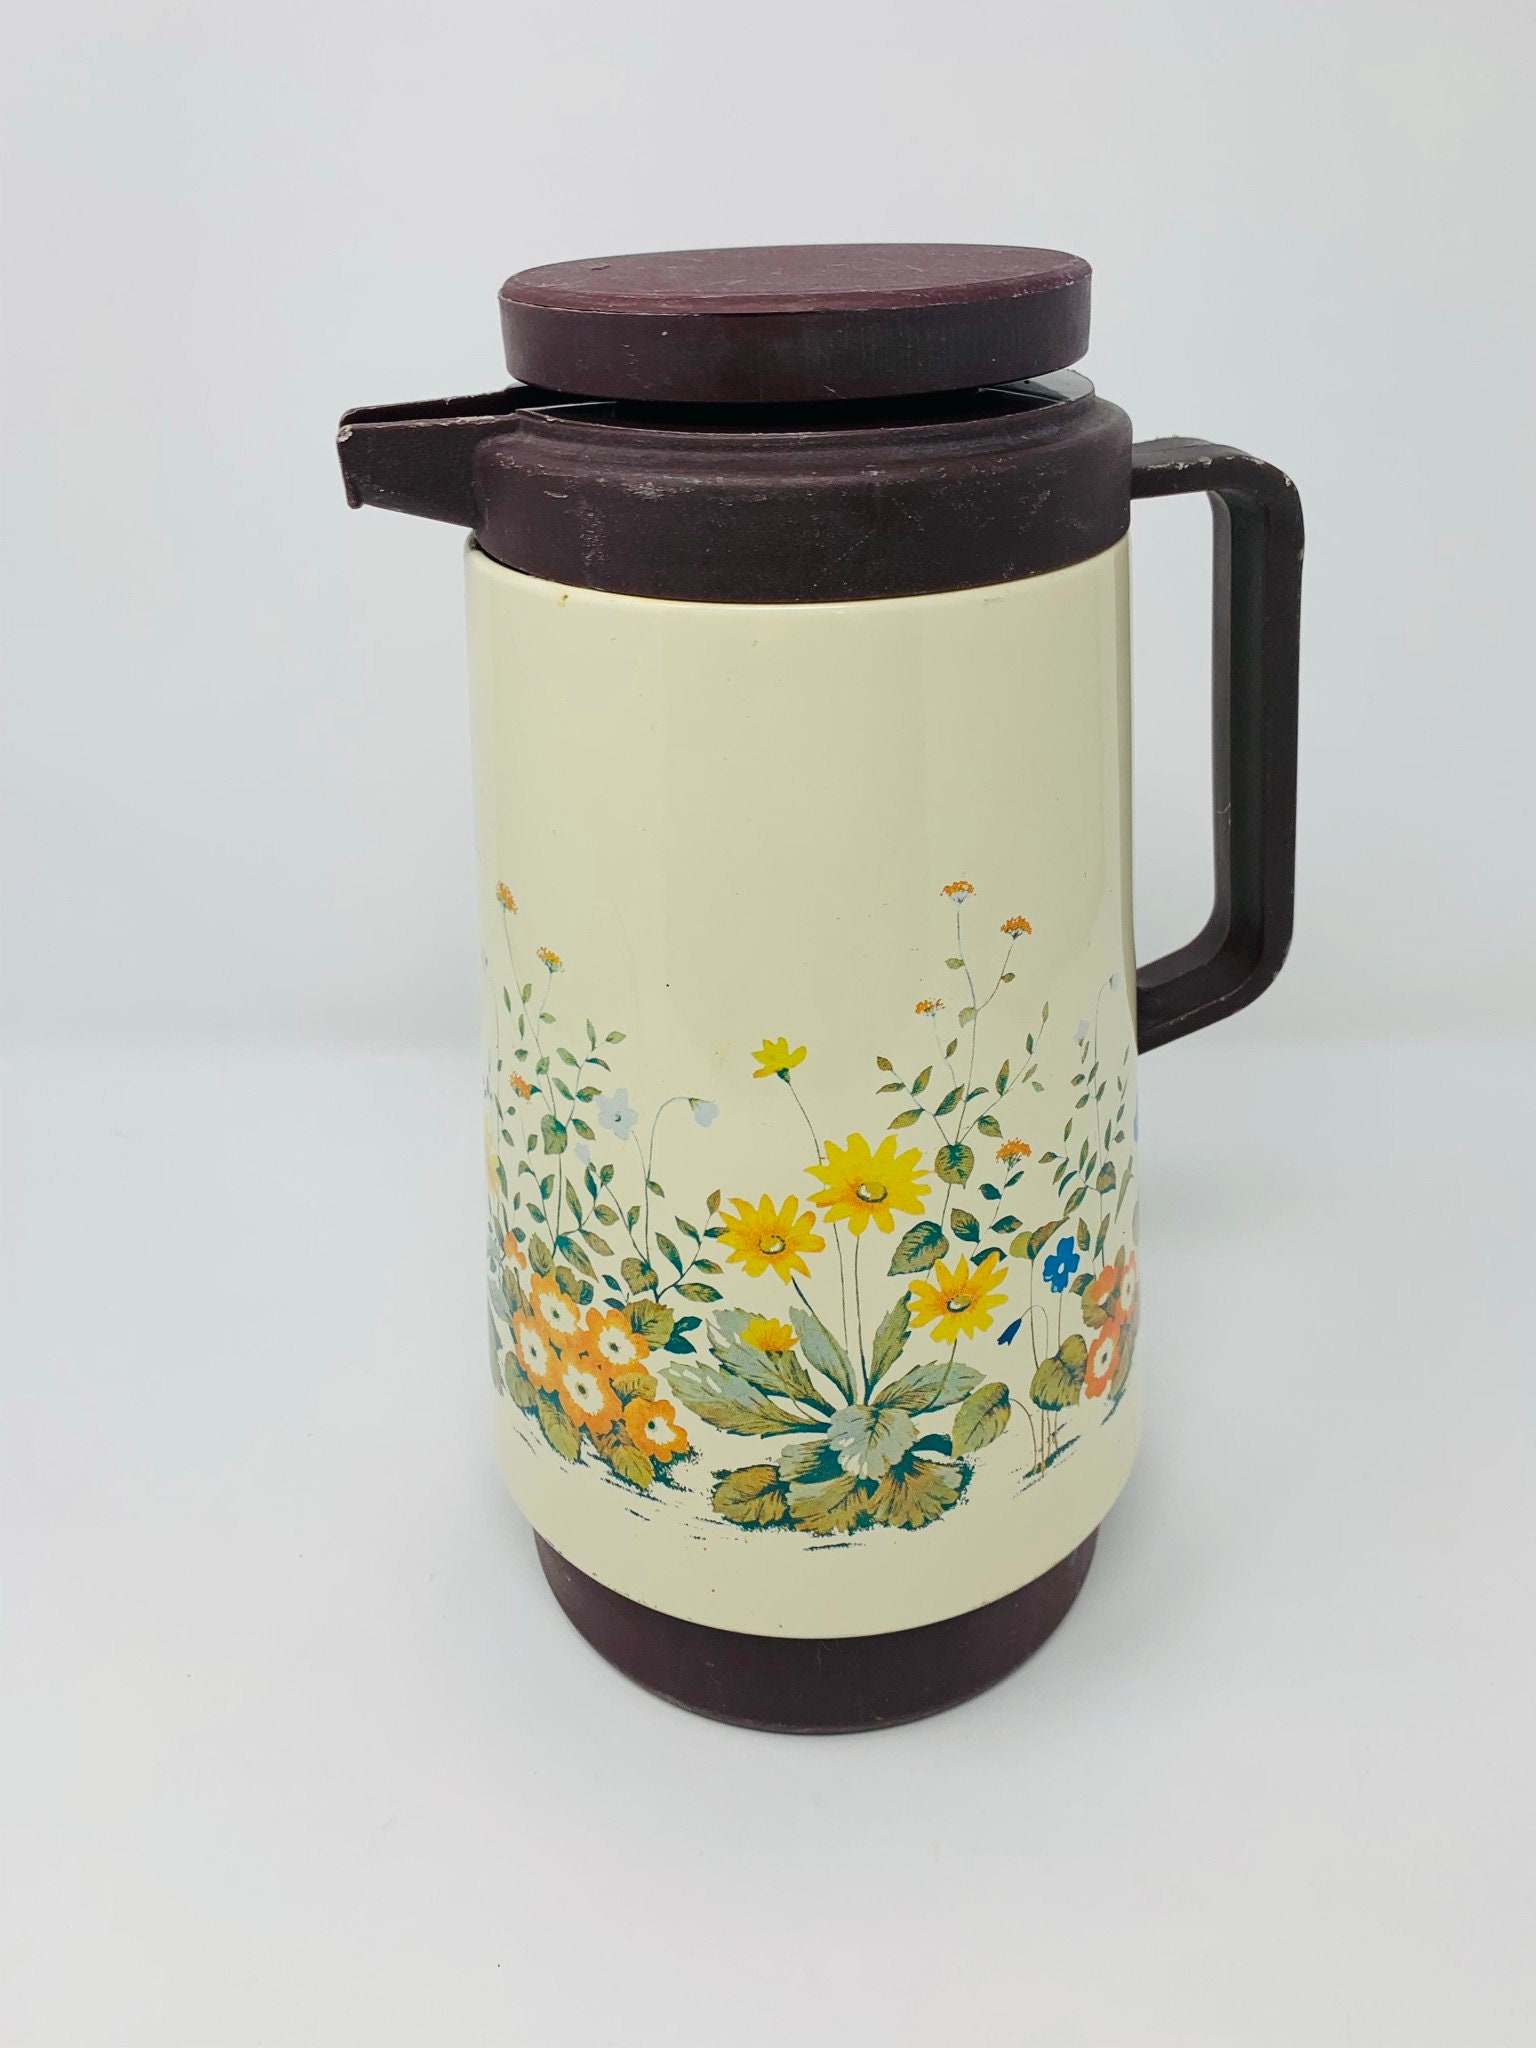 Vintage Phoenix Insulated Pitcher Thermos Hot Or Cold Carafe Pitcher